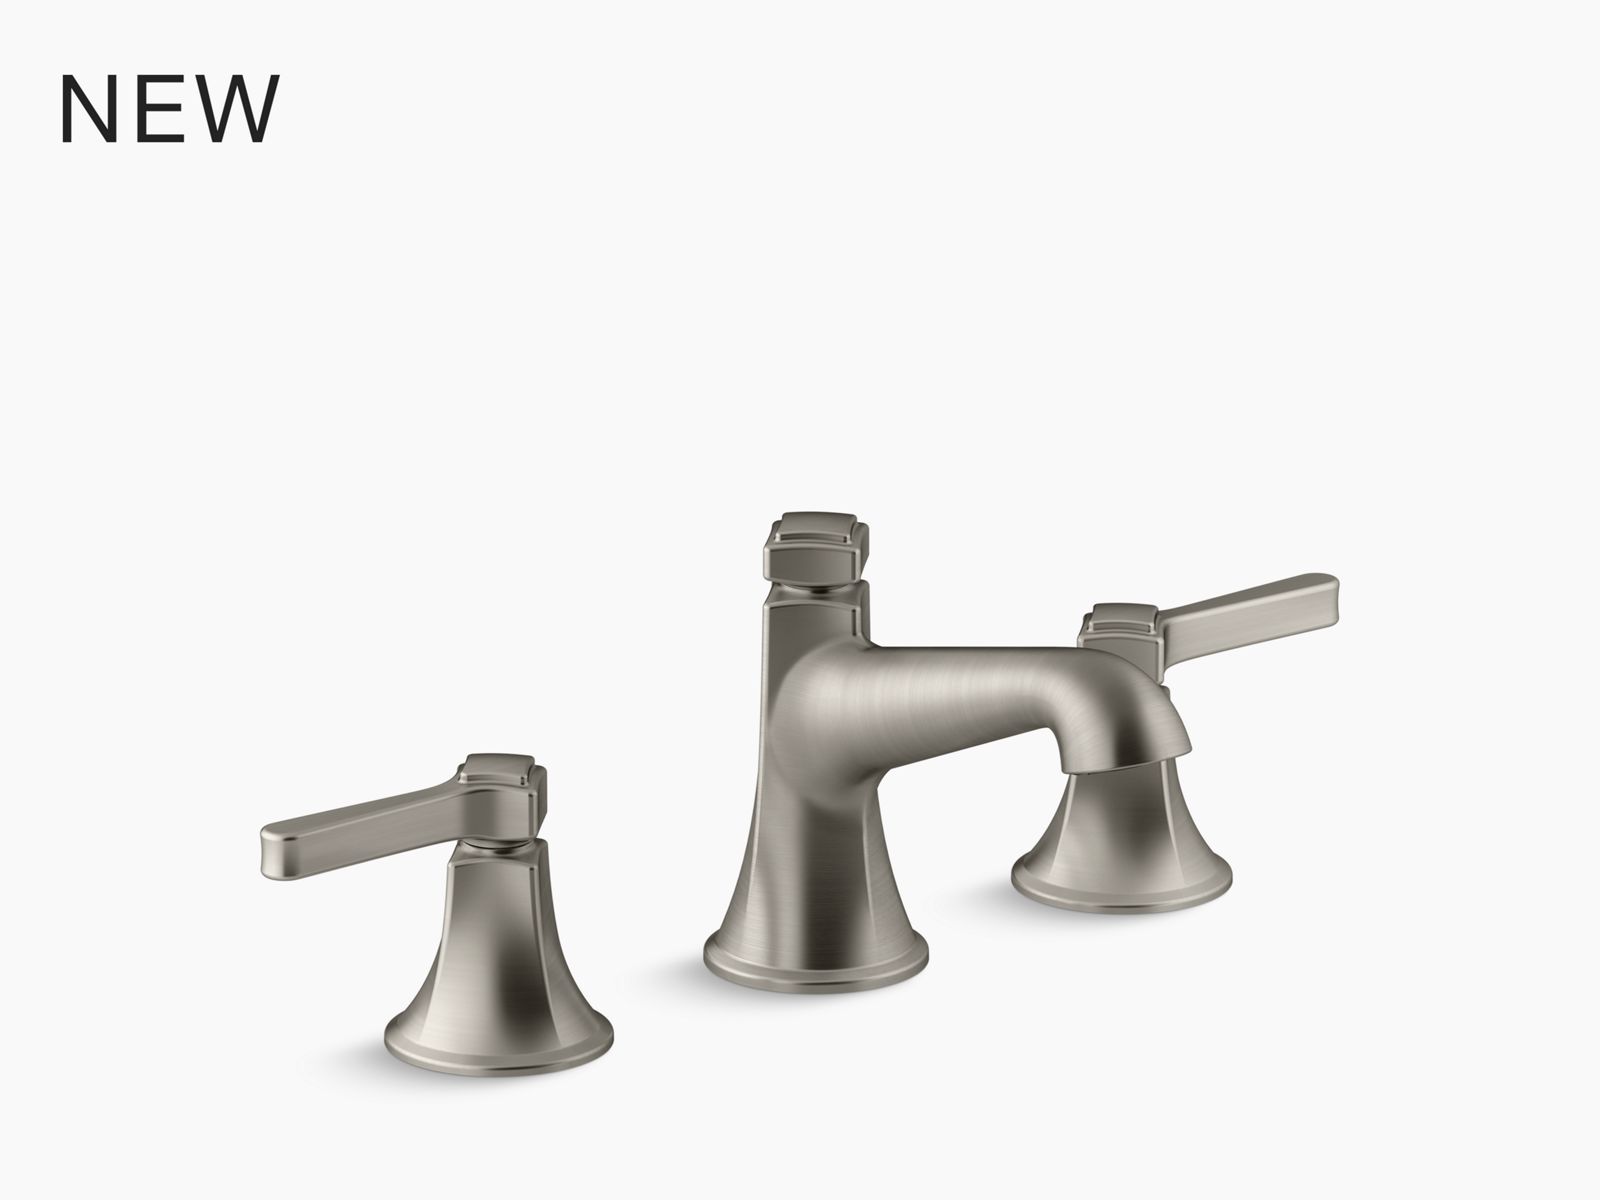 Occasion Tall Single Control Lavatory Faucet